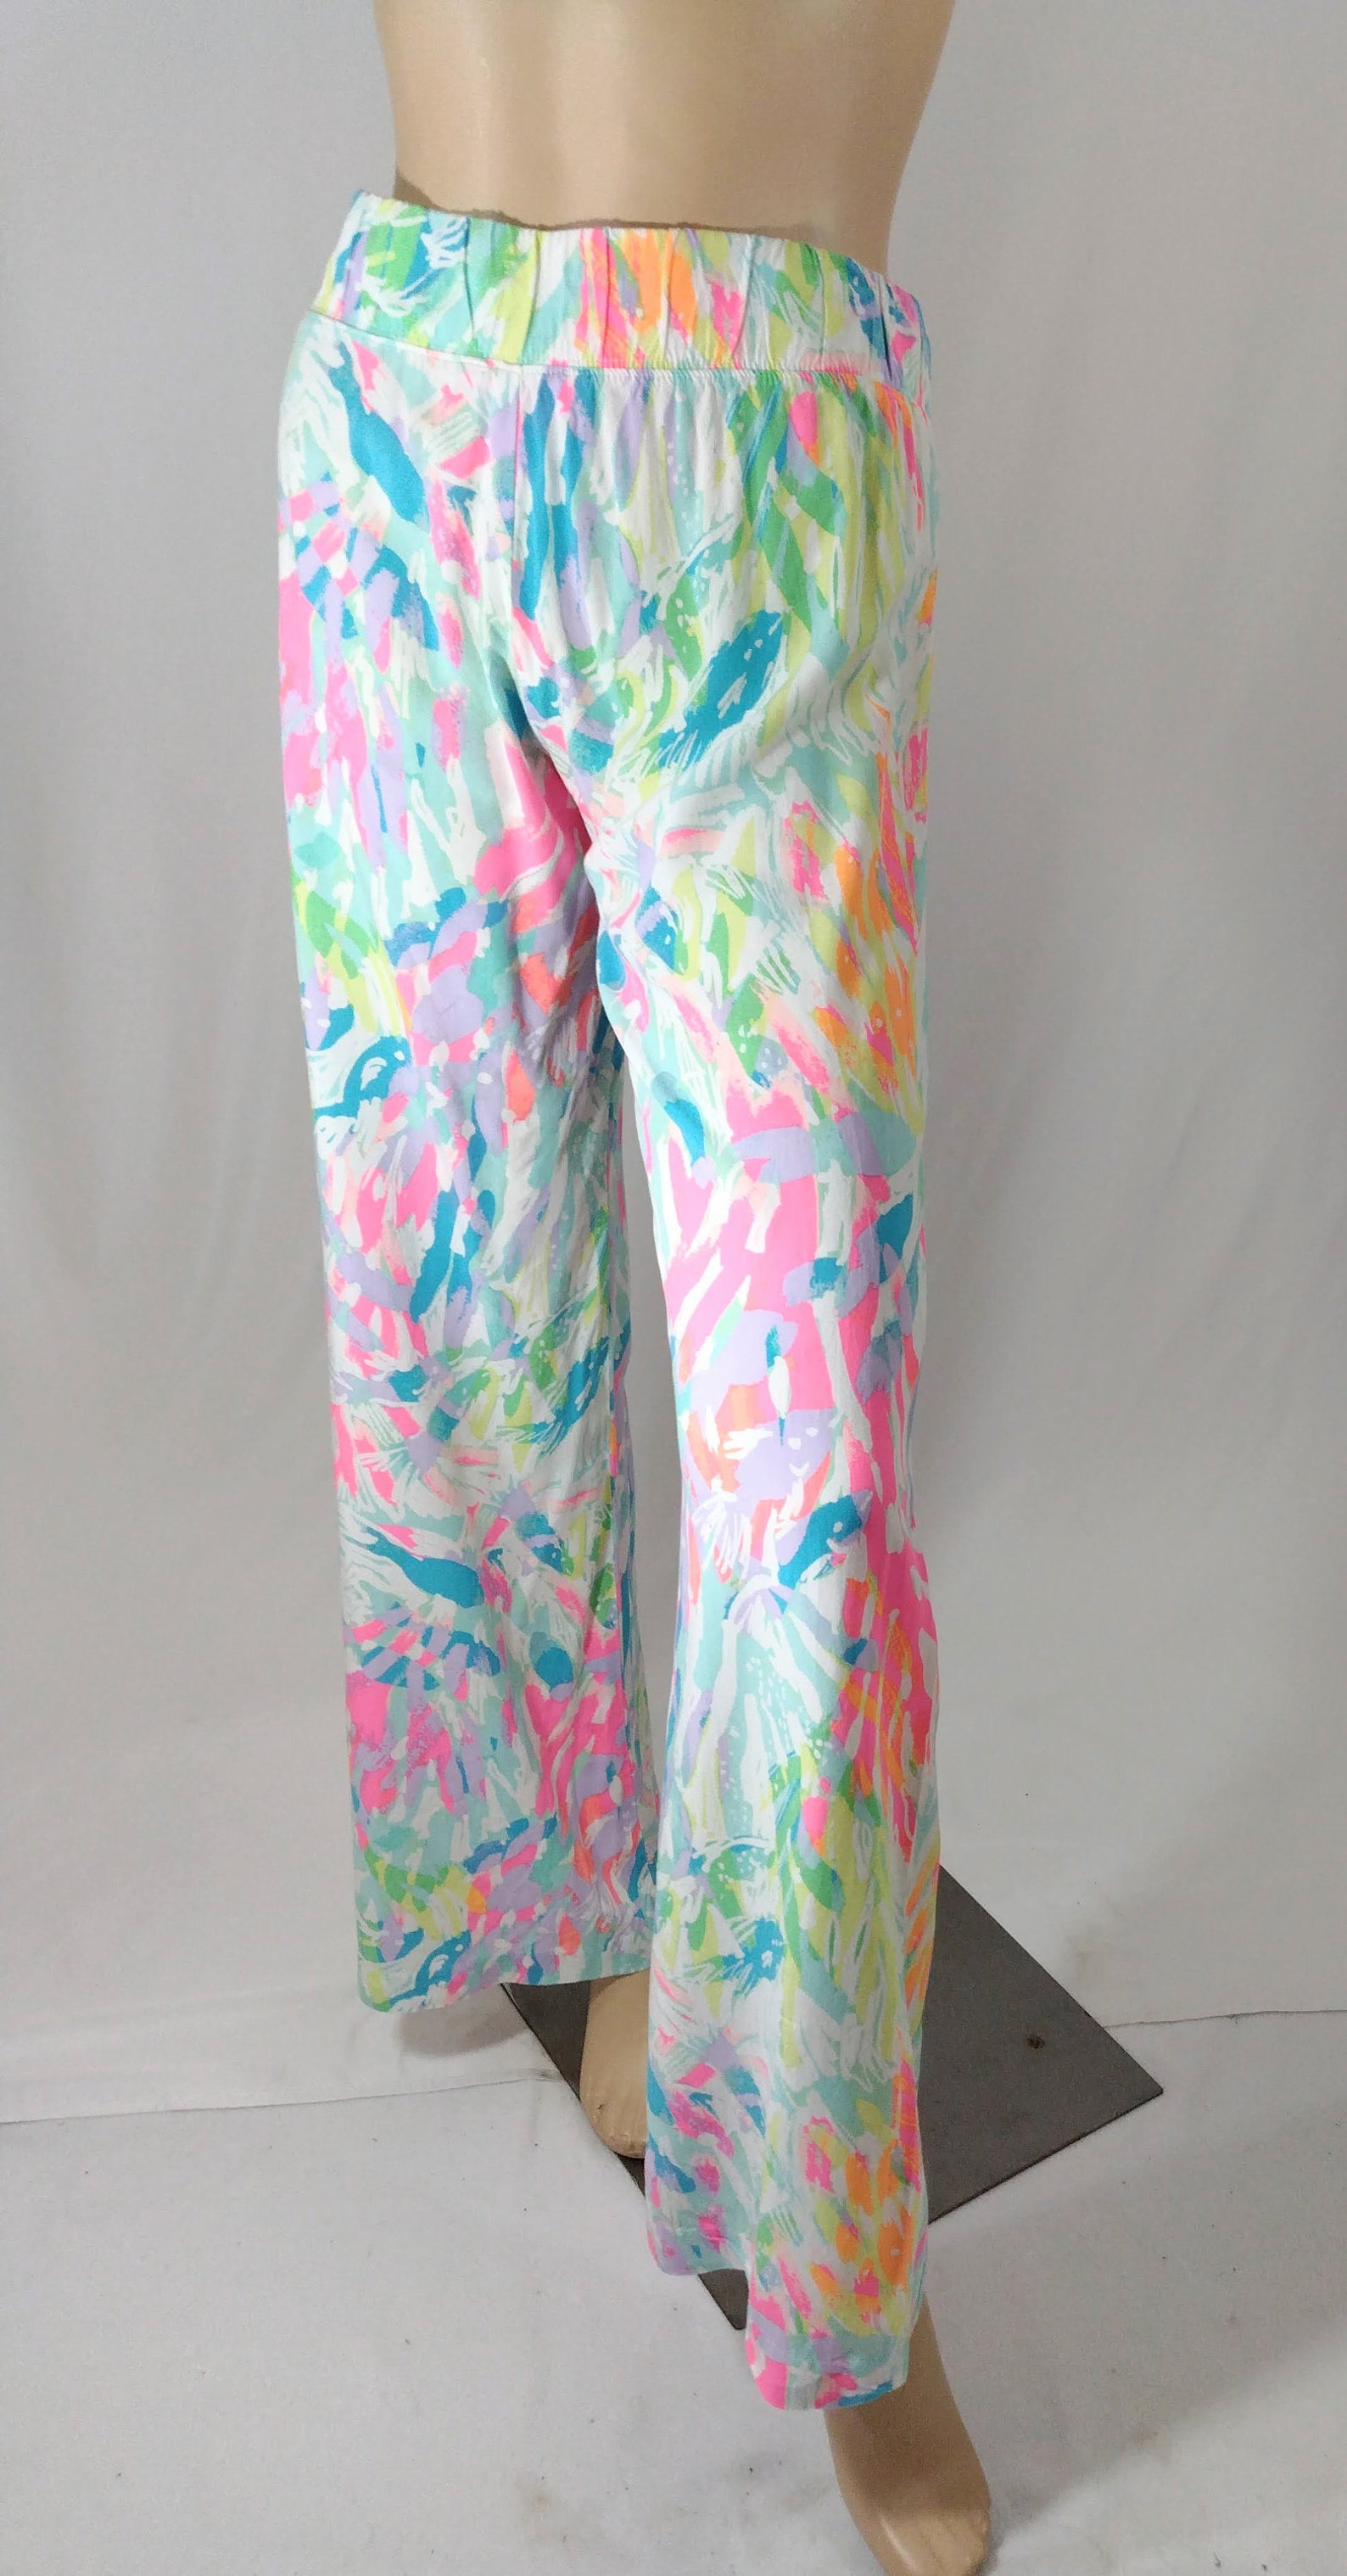 Lilly Pulitzer Pants Women's Pants Wild Colorful Neon - Etsy